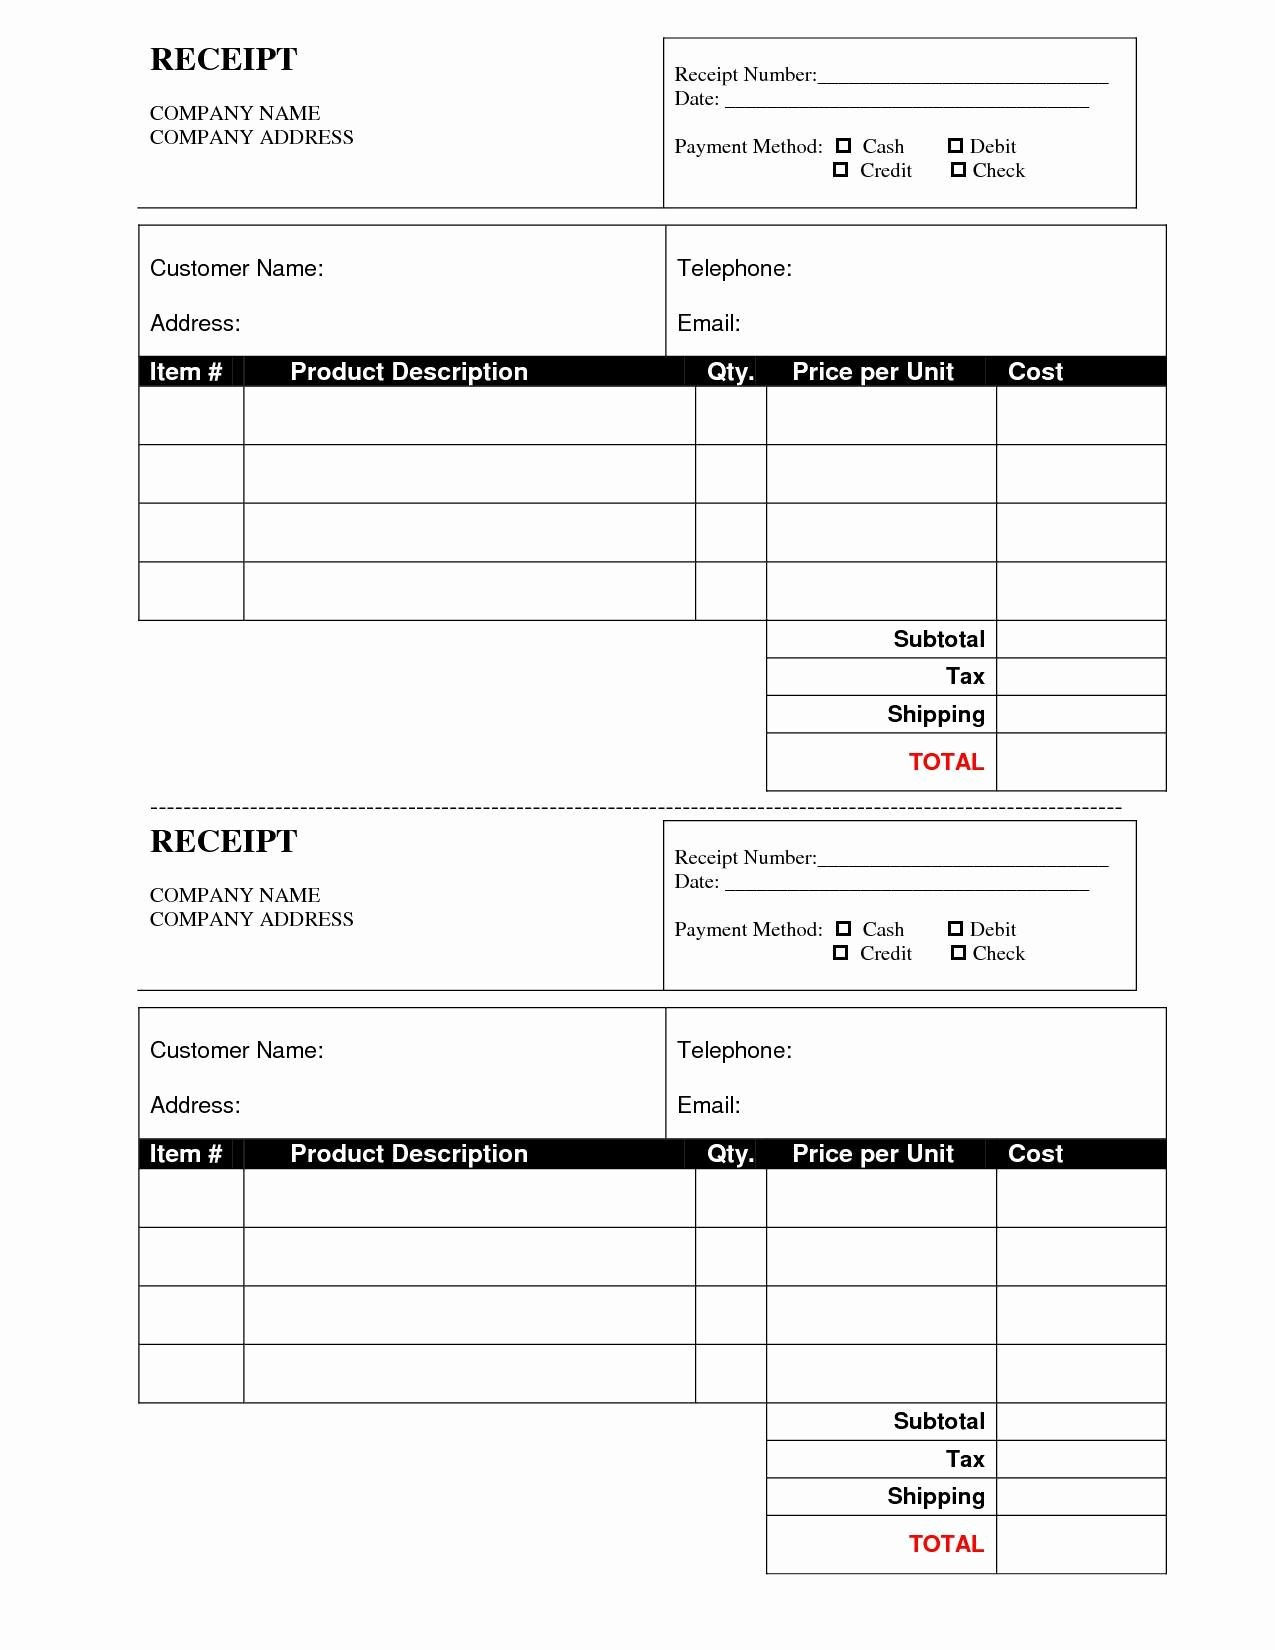 Check Stubs Free Fake Pay Download Blank Real Online Canada Free Printable Pay Stubs Free